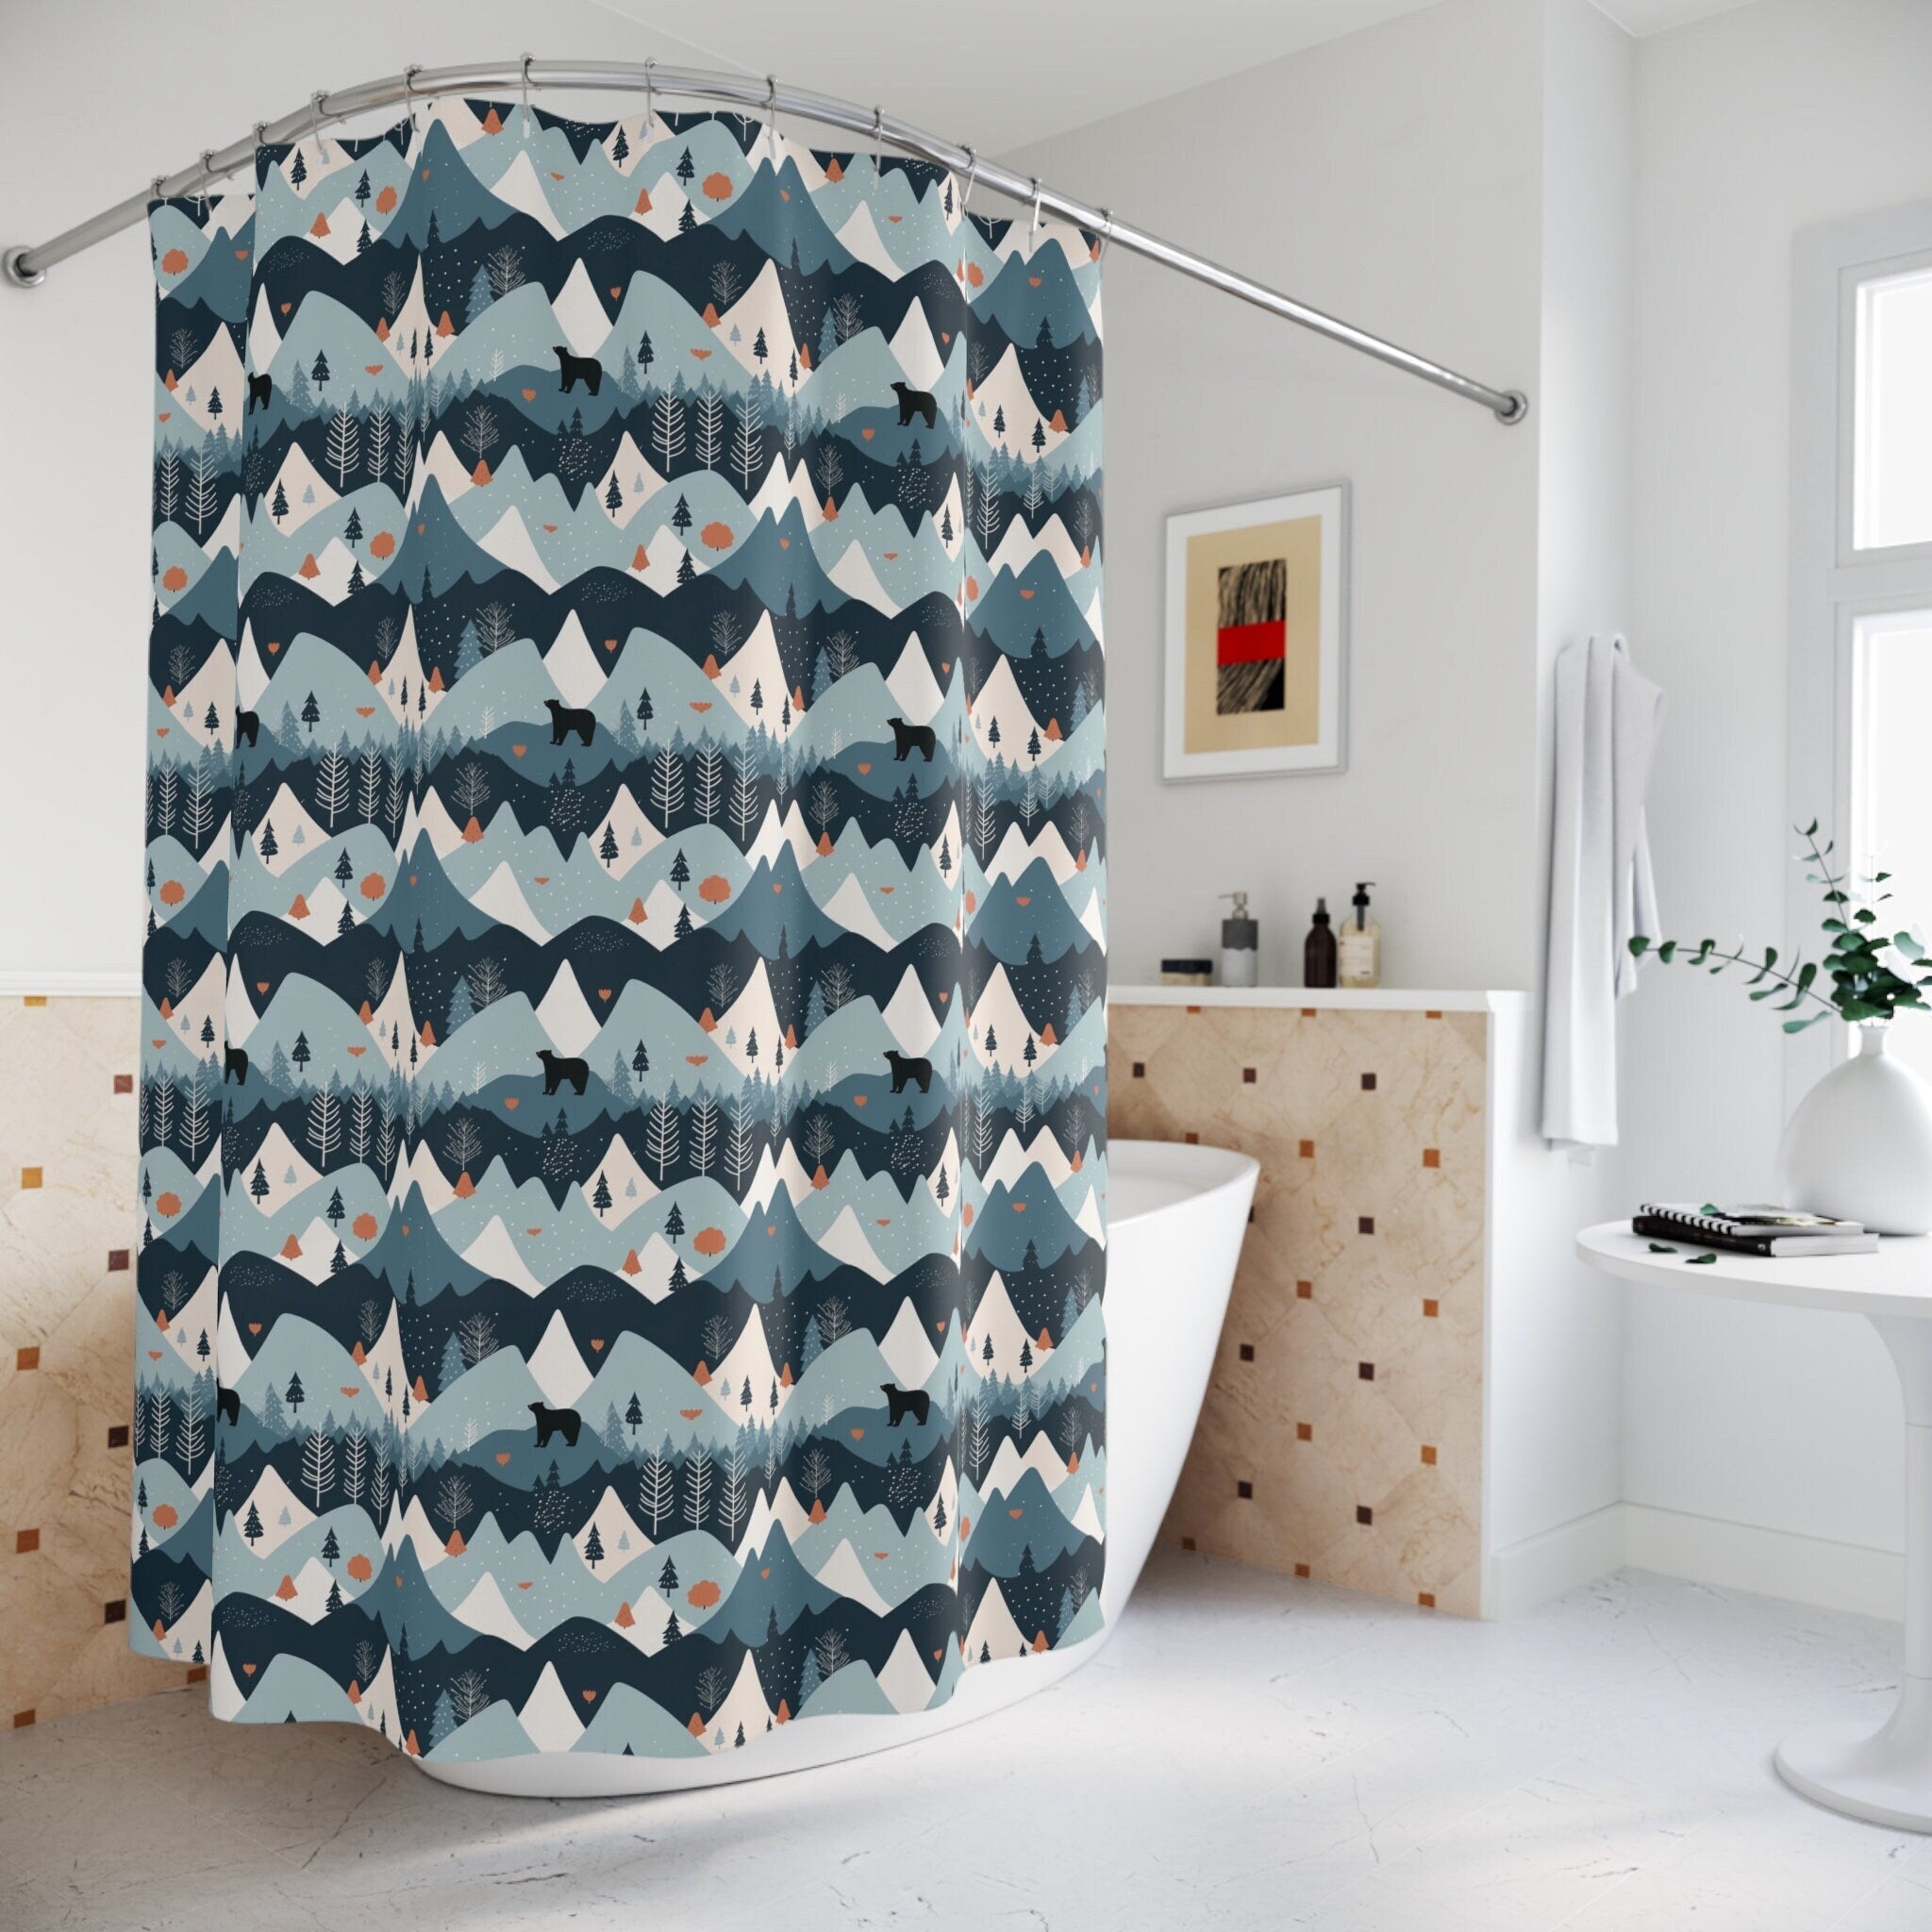 Black Bears in Autumn Mountains Shower Curtain 71x74 inches